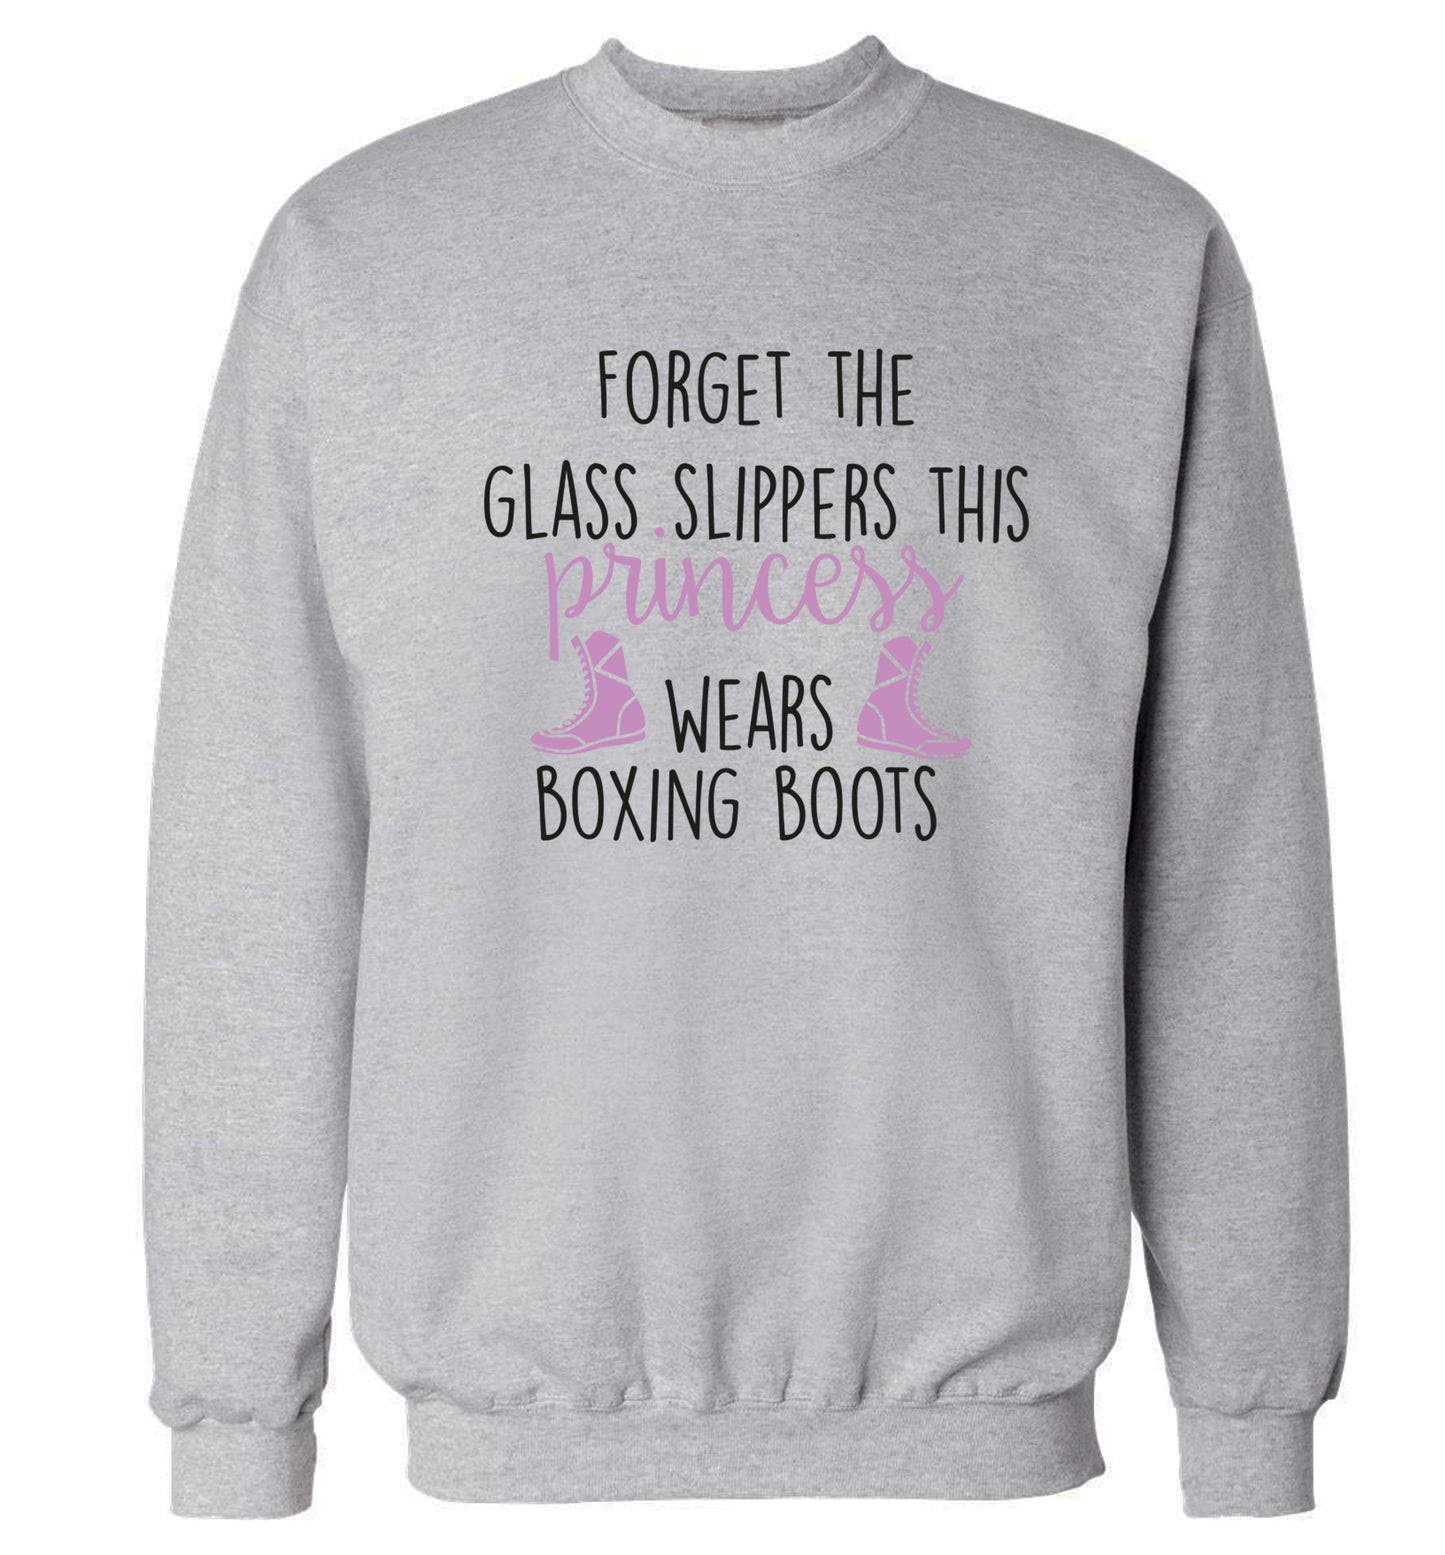 Forget the glass slippers this princess wears boxing boots Adult's unisex grey Sweater 2XL